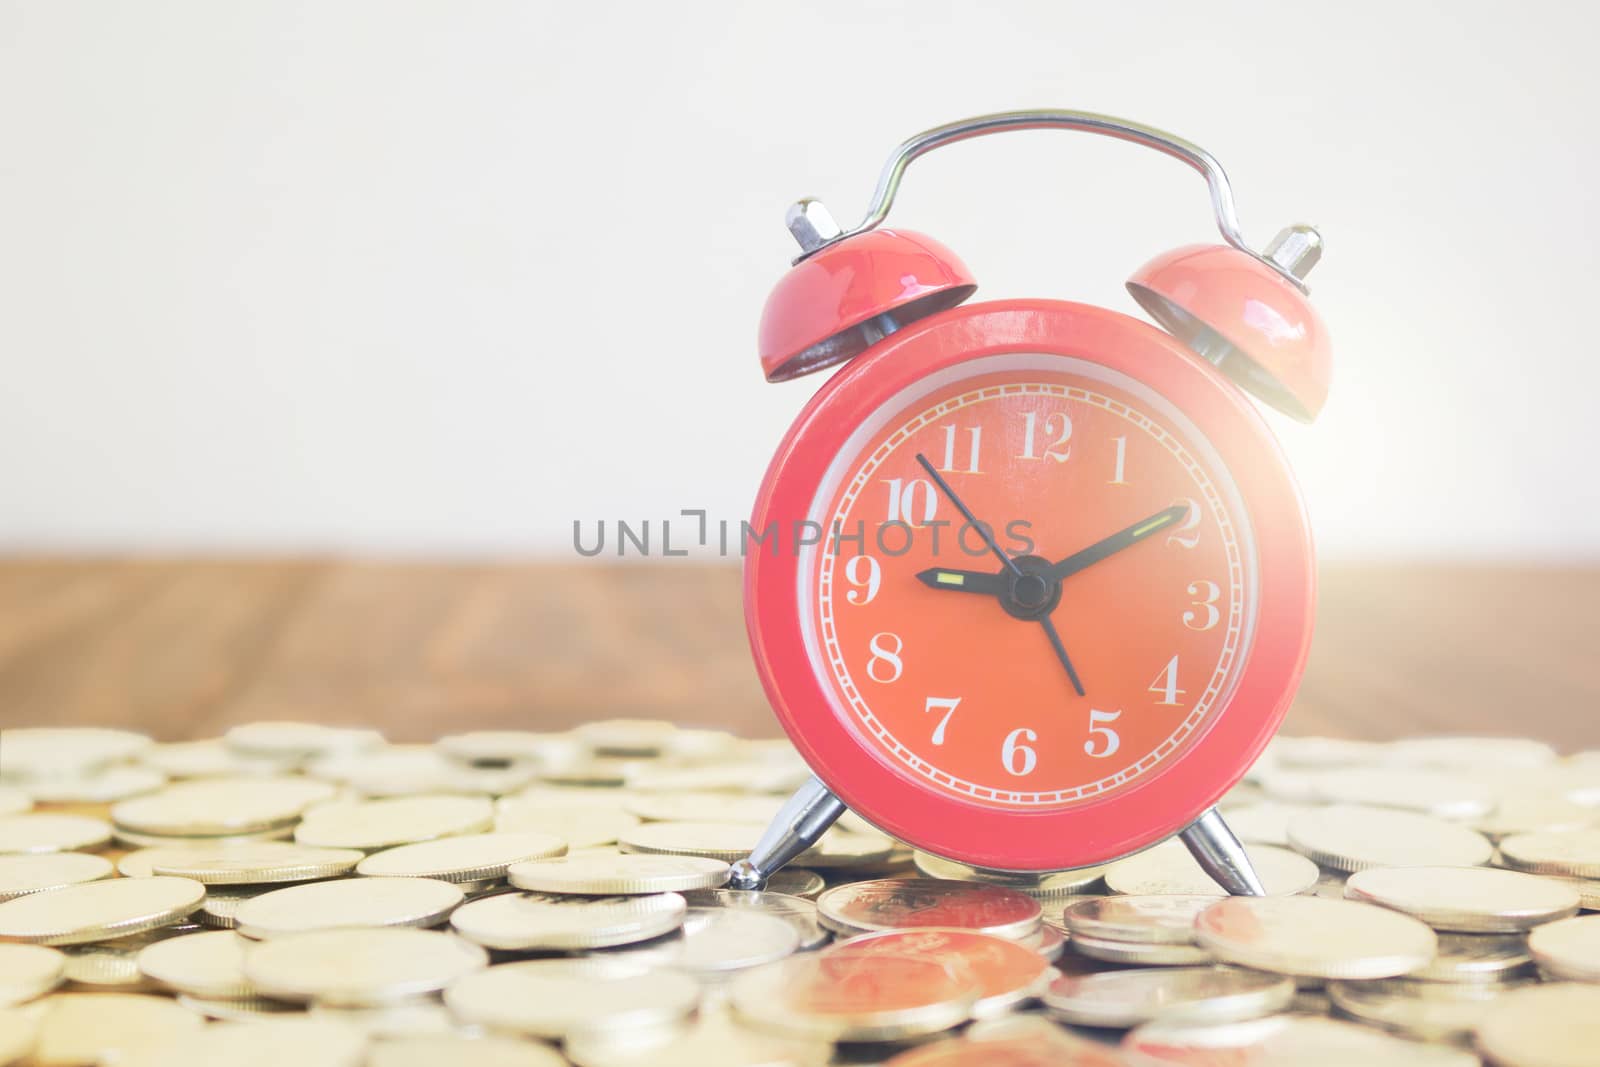 Image Of Coins With Red Fashioned Alarm Clock For Display Planni by rakoptonLPN